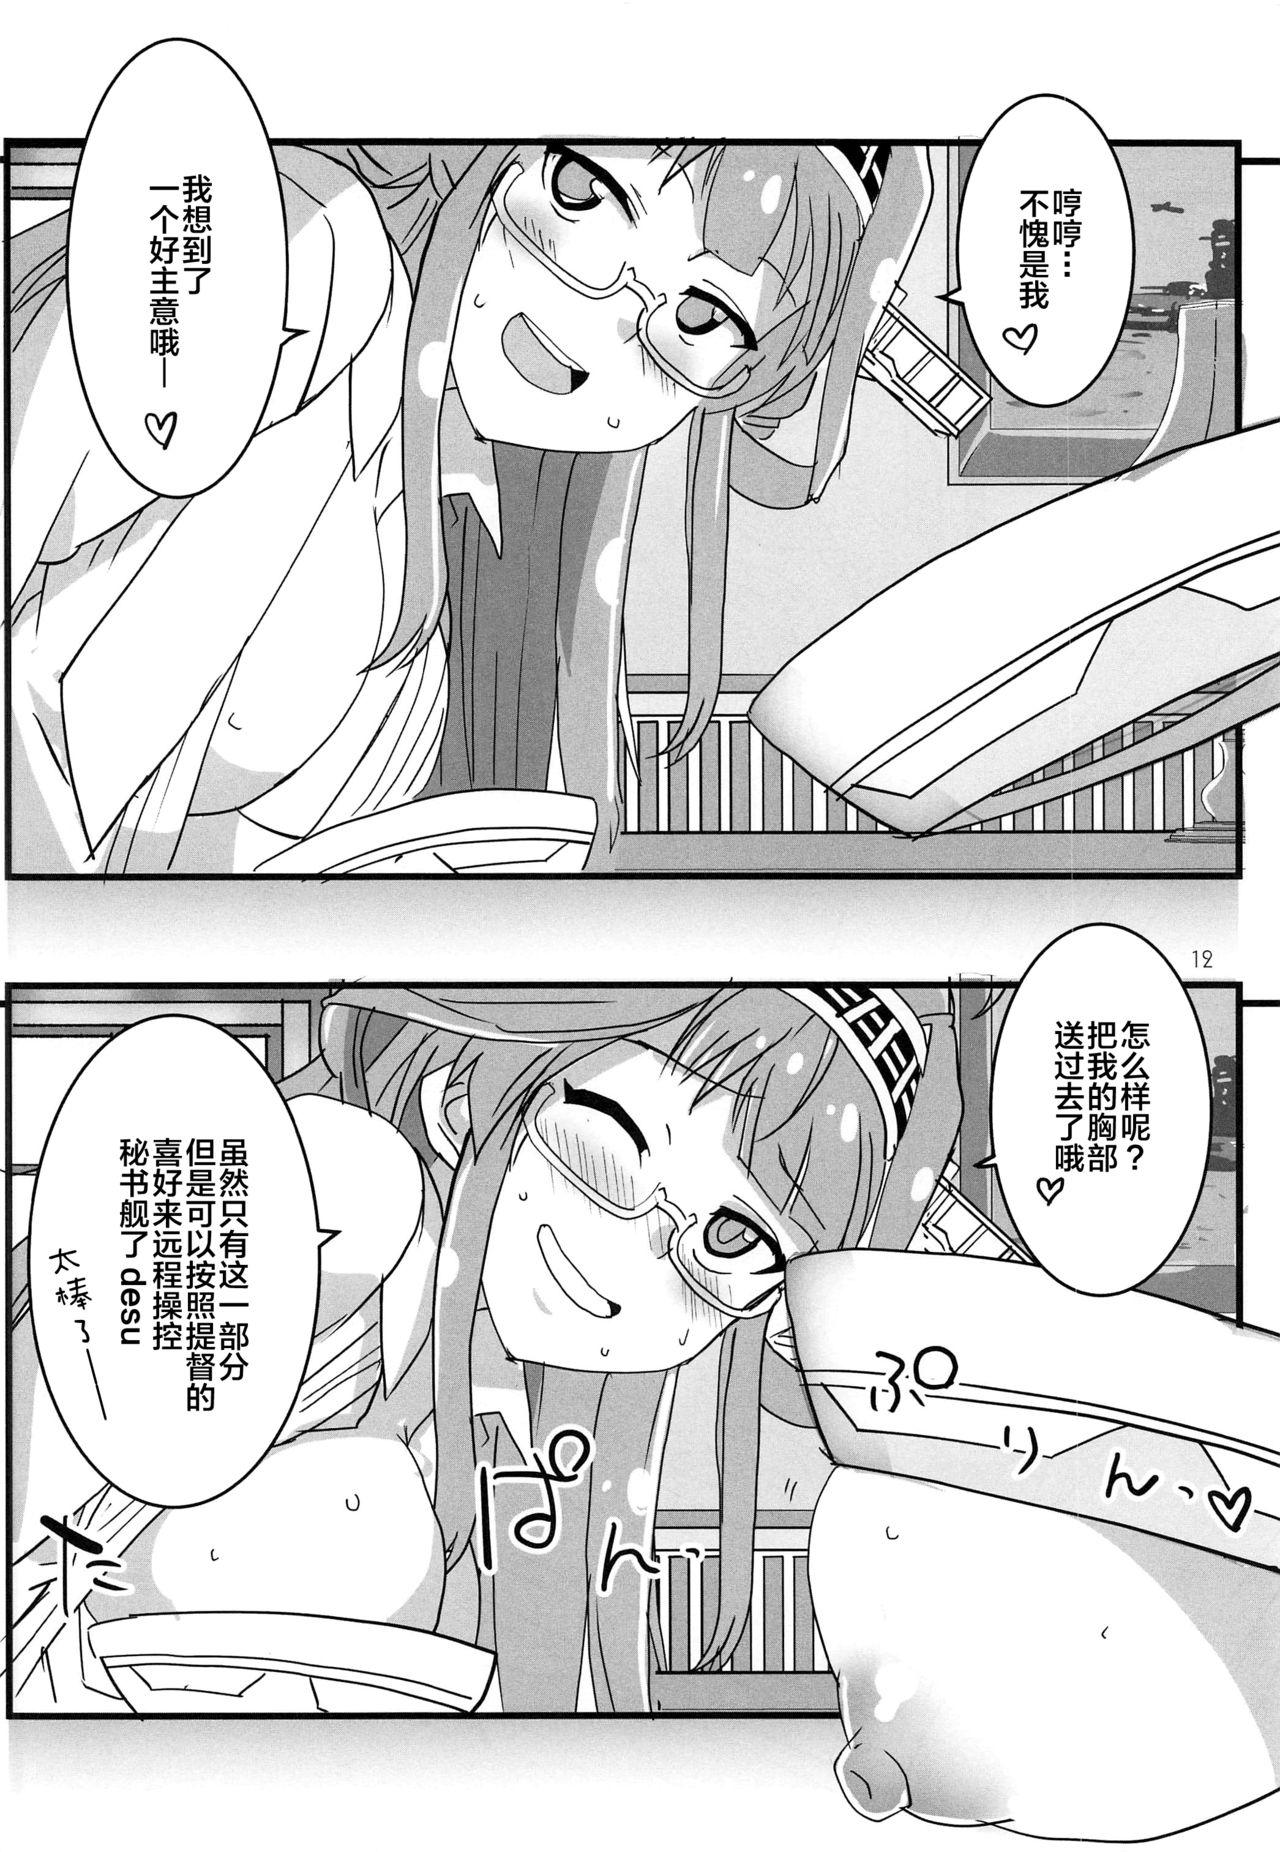 Camwhore Remote Love - Kantai collection Watersports - Page 11